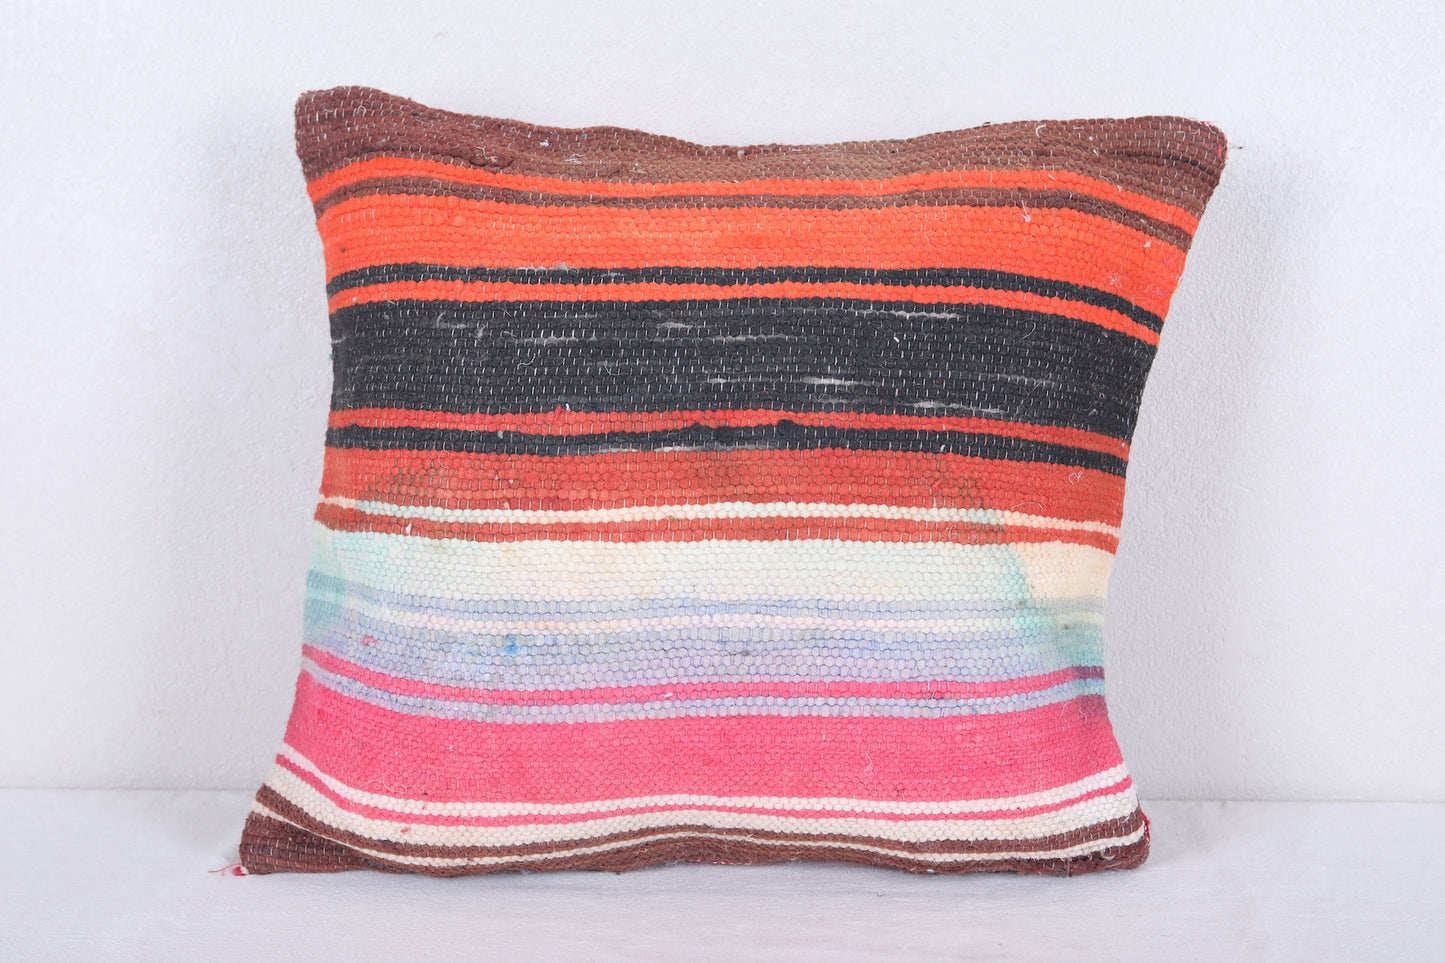 Vintage moroccan handwoven kilim pillow 16.5 INCHES X 18.1 INCHES